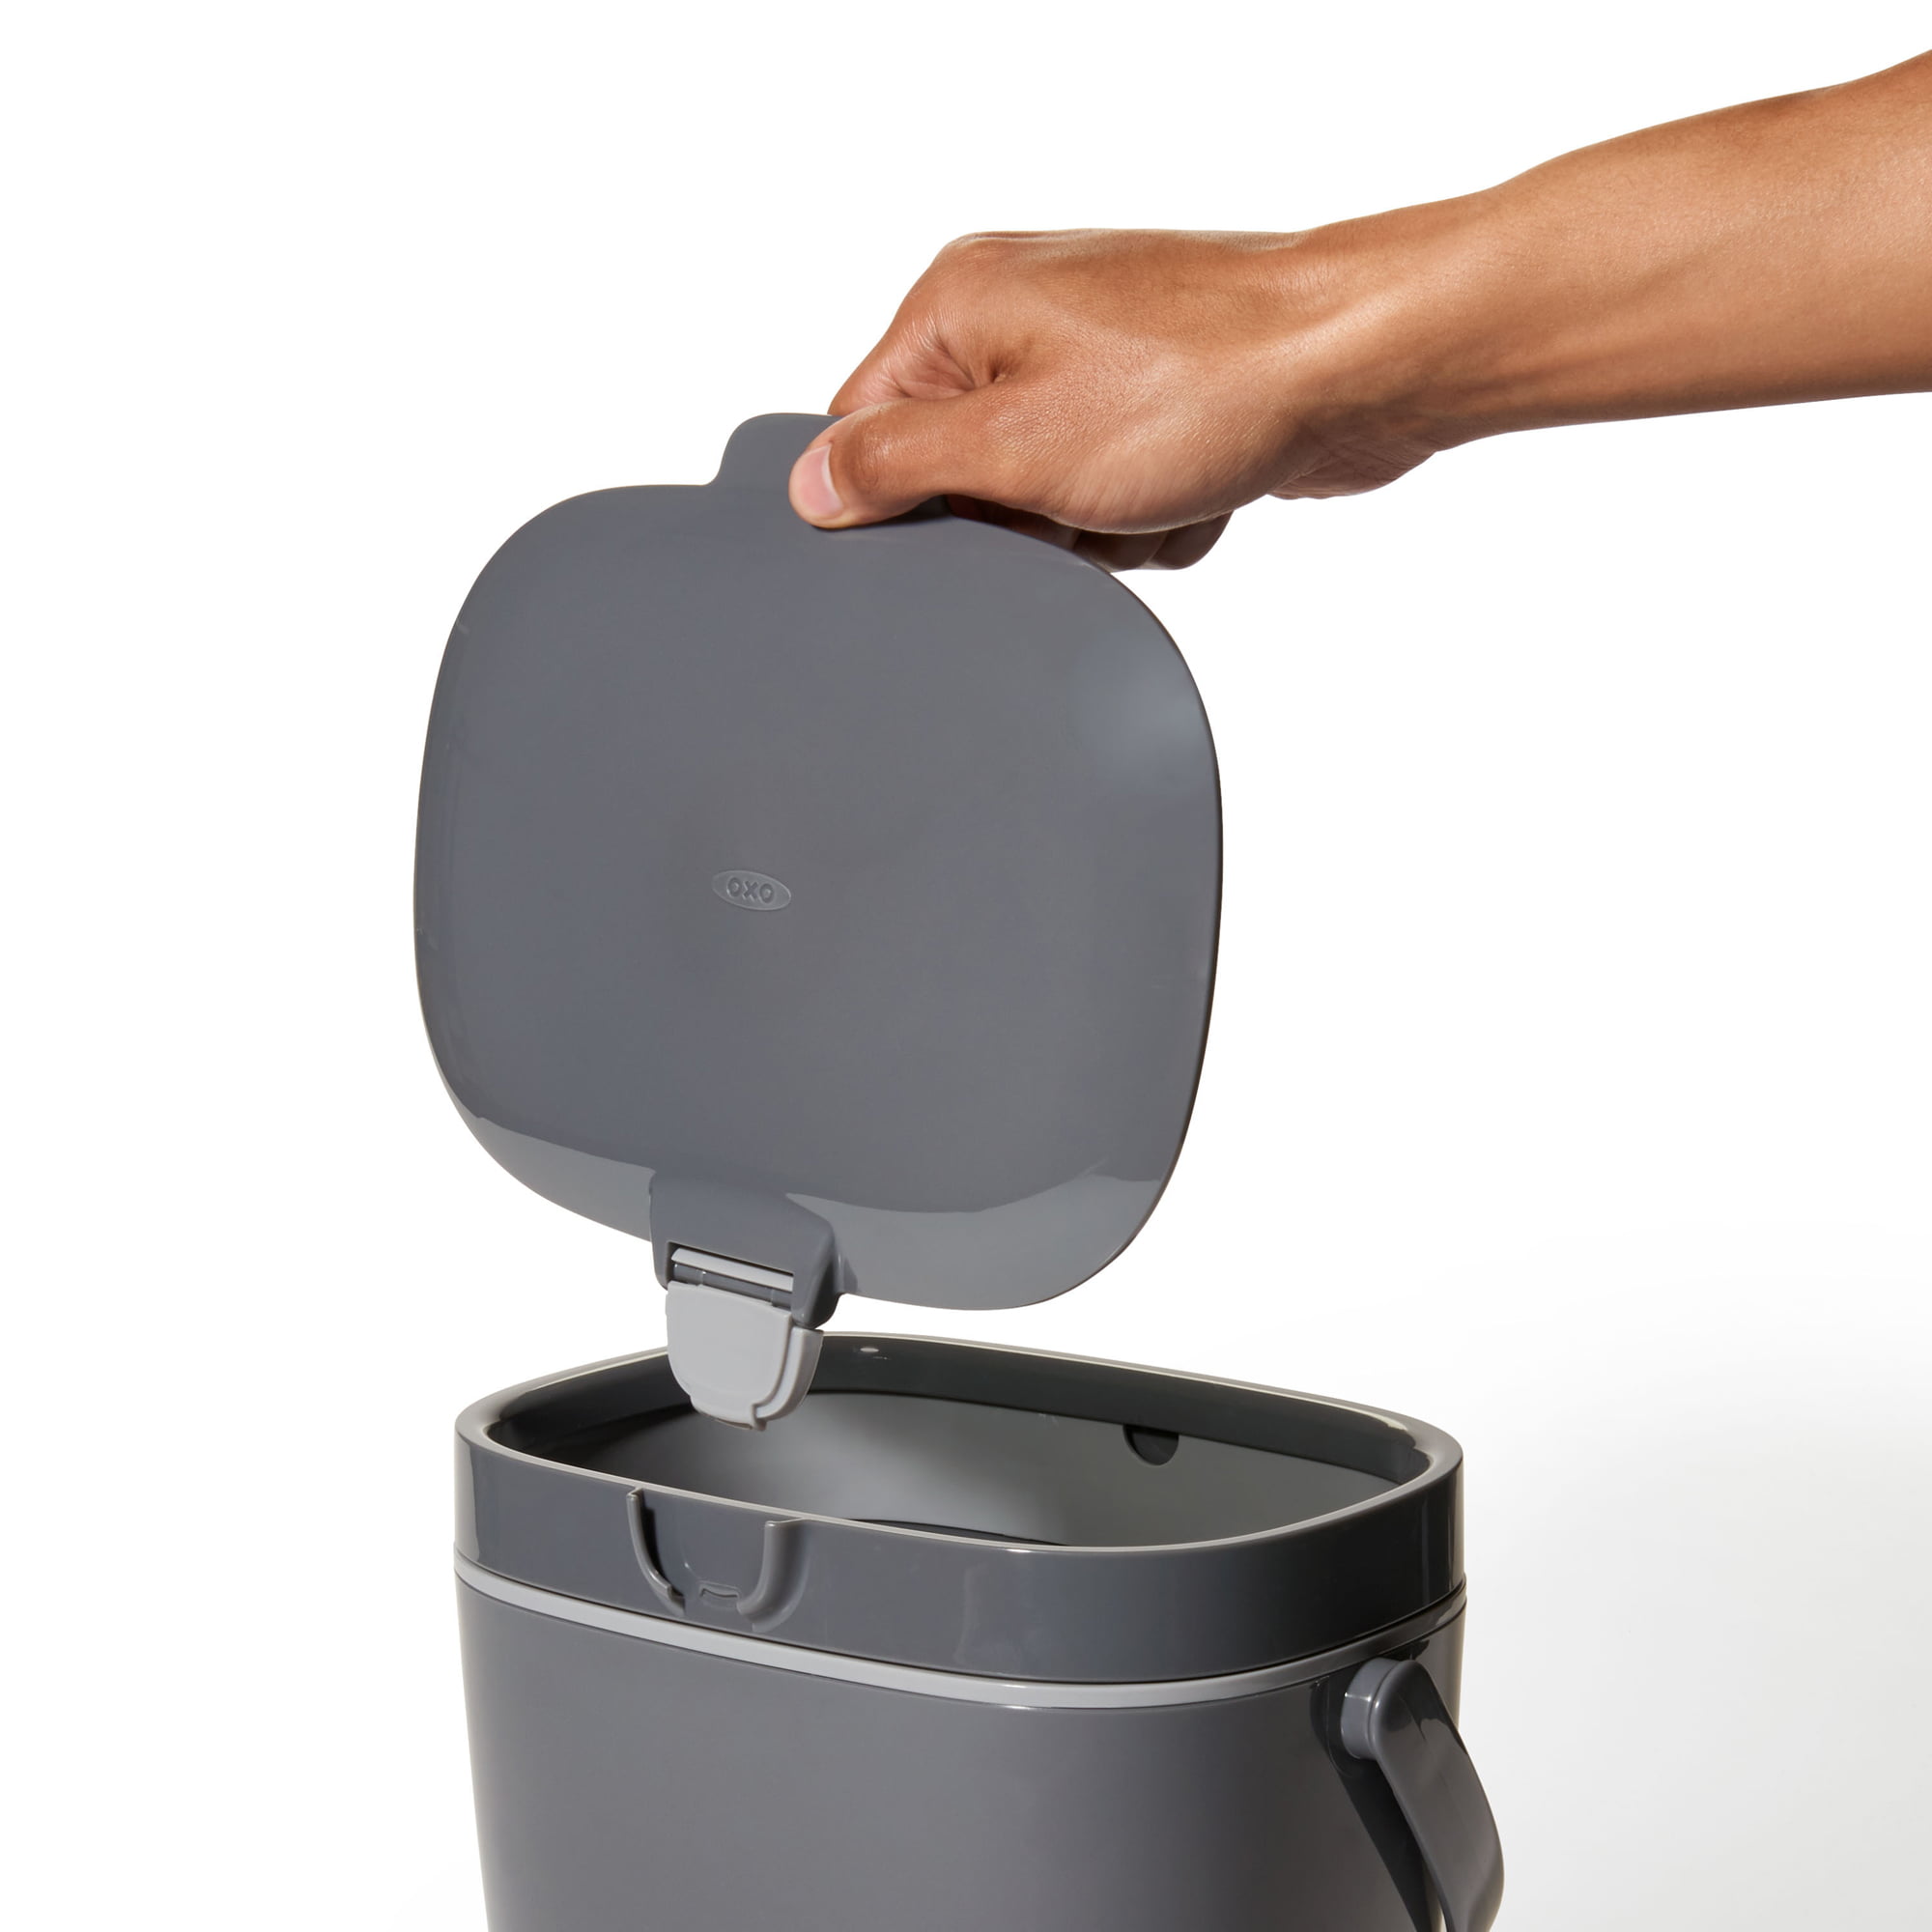 OXO - Good Grips Easy-Clean Compost Bin – Kitchen Store & More